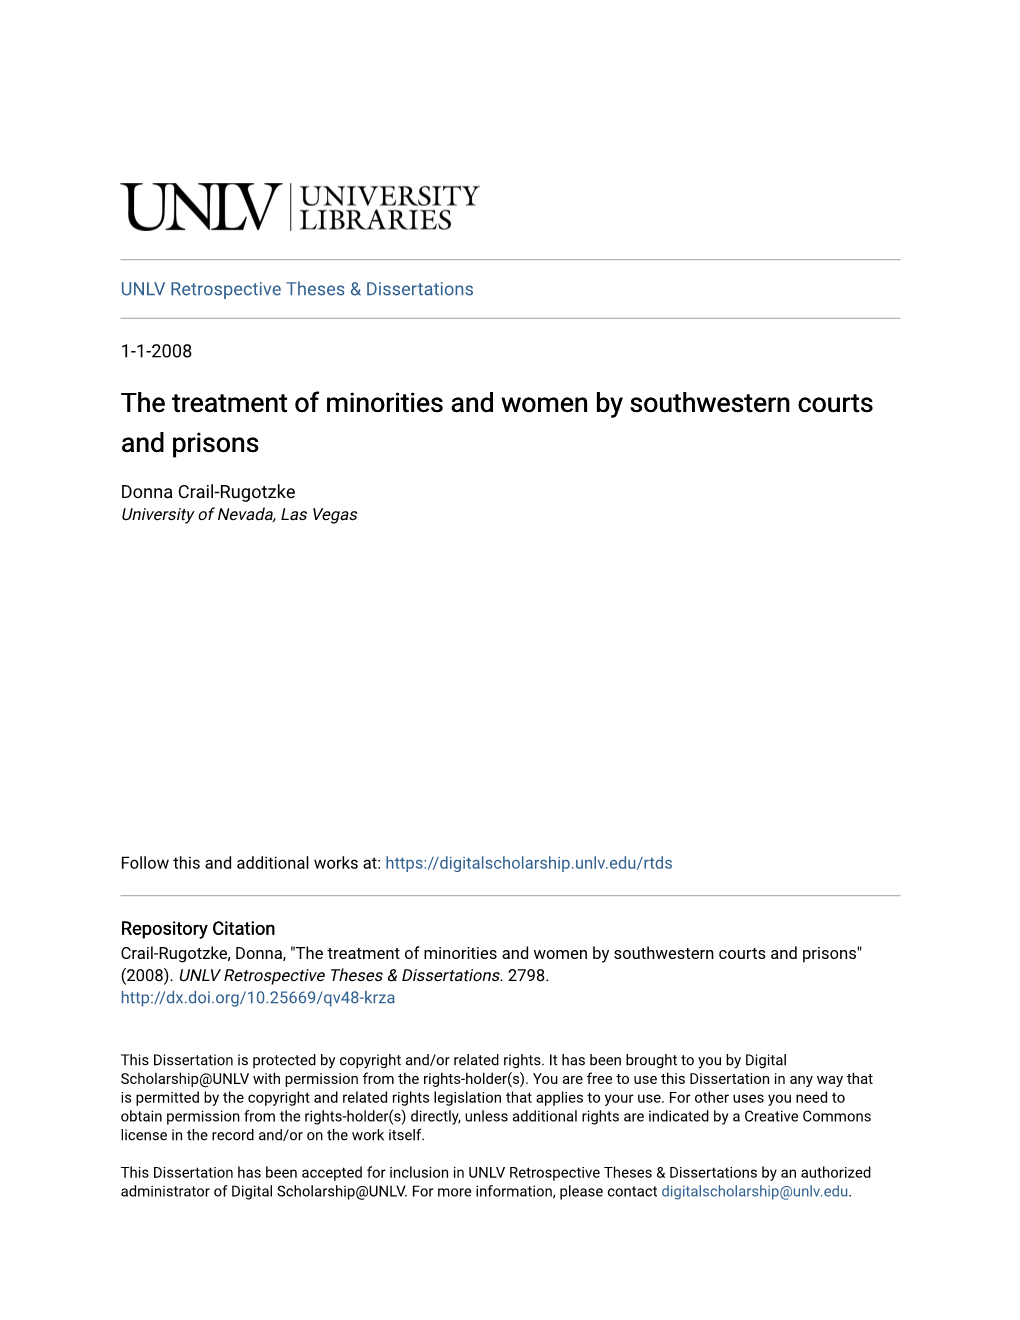 The Treatment of Minorities and Women by Southwestern Courts and Prisons